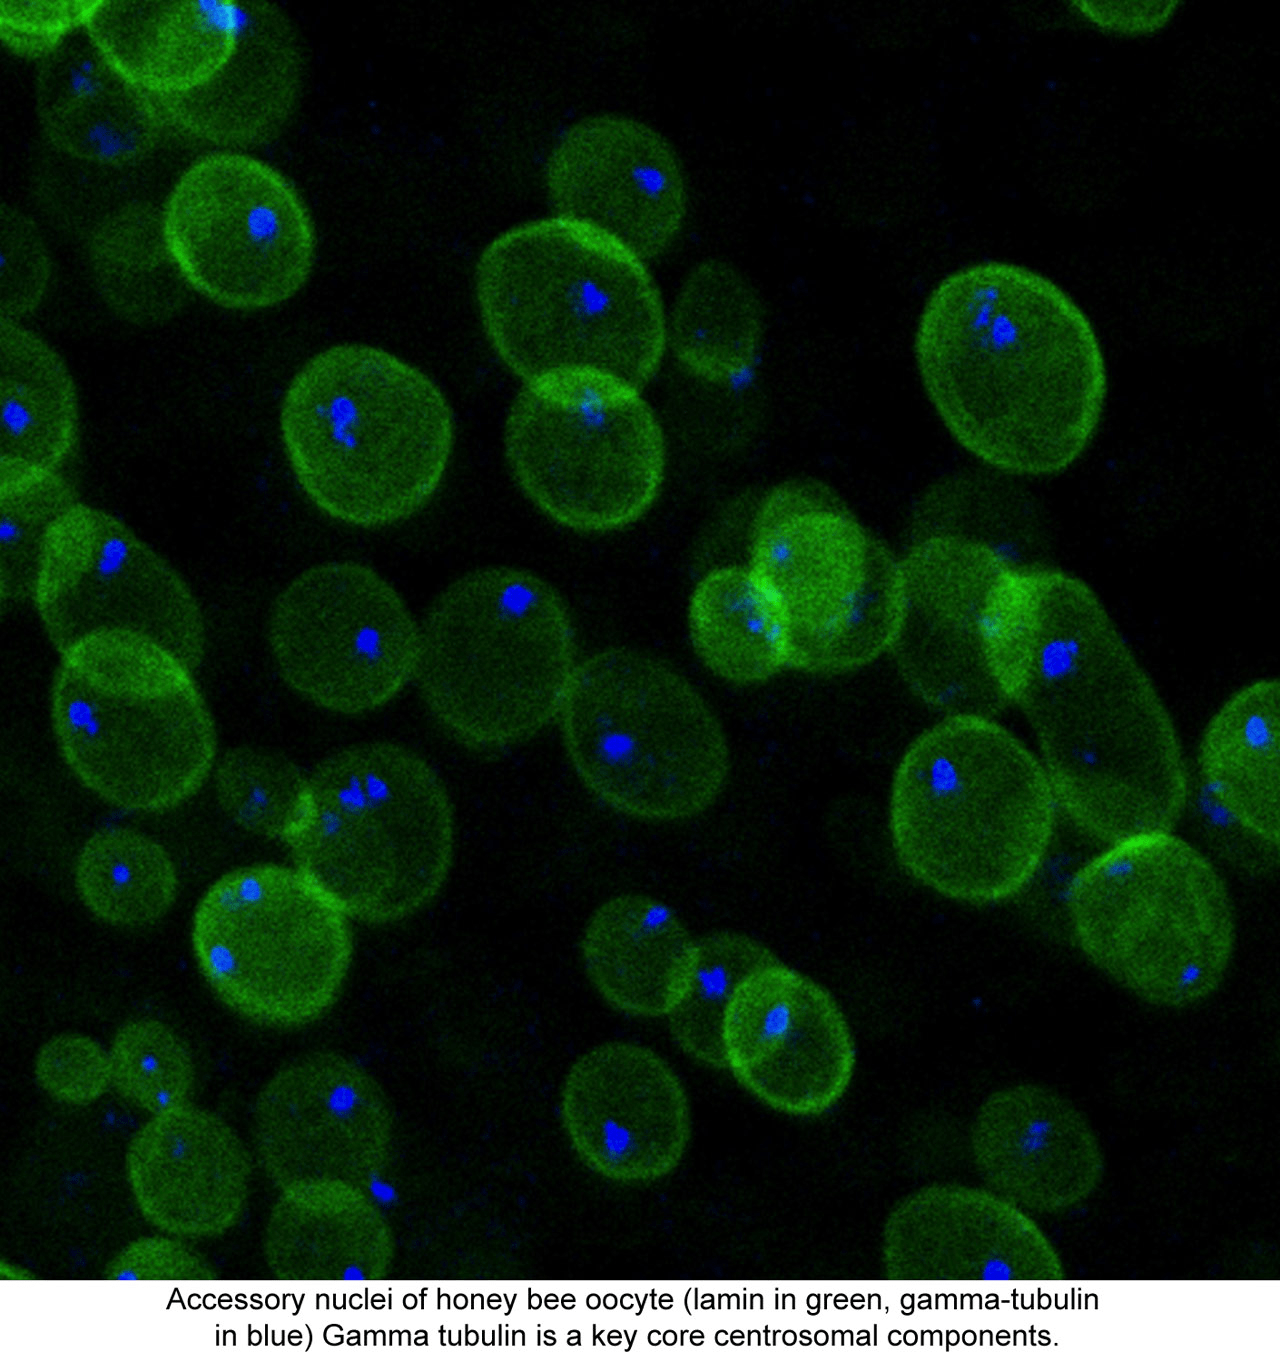 Honey bee oocytes with dual fluorescent labeling